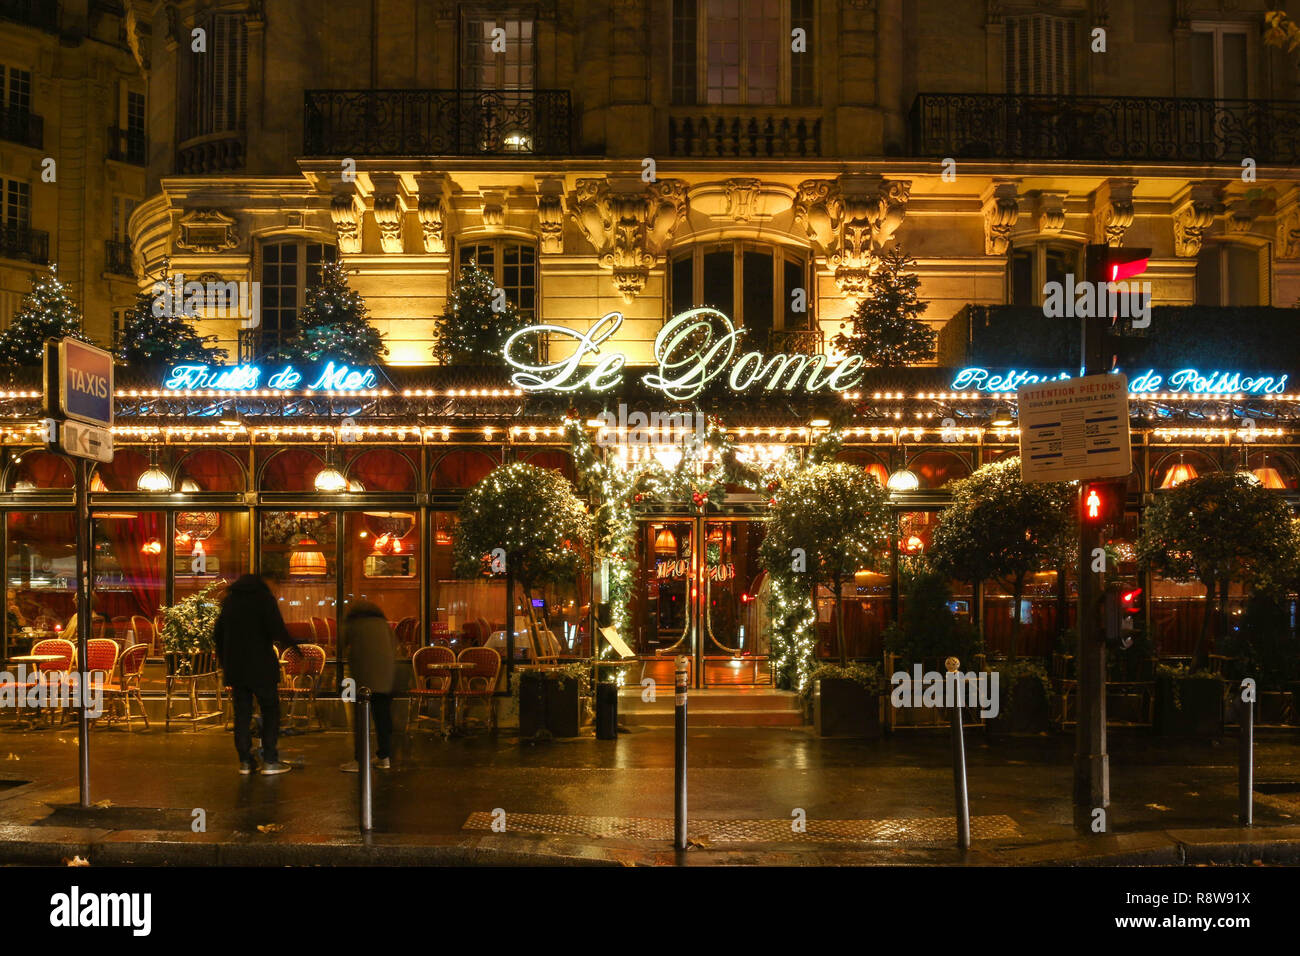 The famous restaurant Le Dome decorated for Christmas, Paris, France. Stock Photo